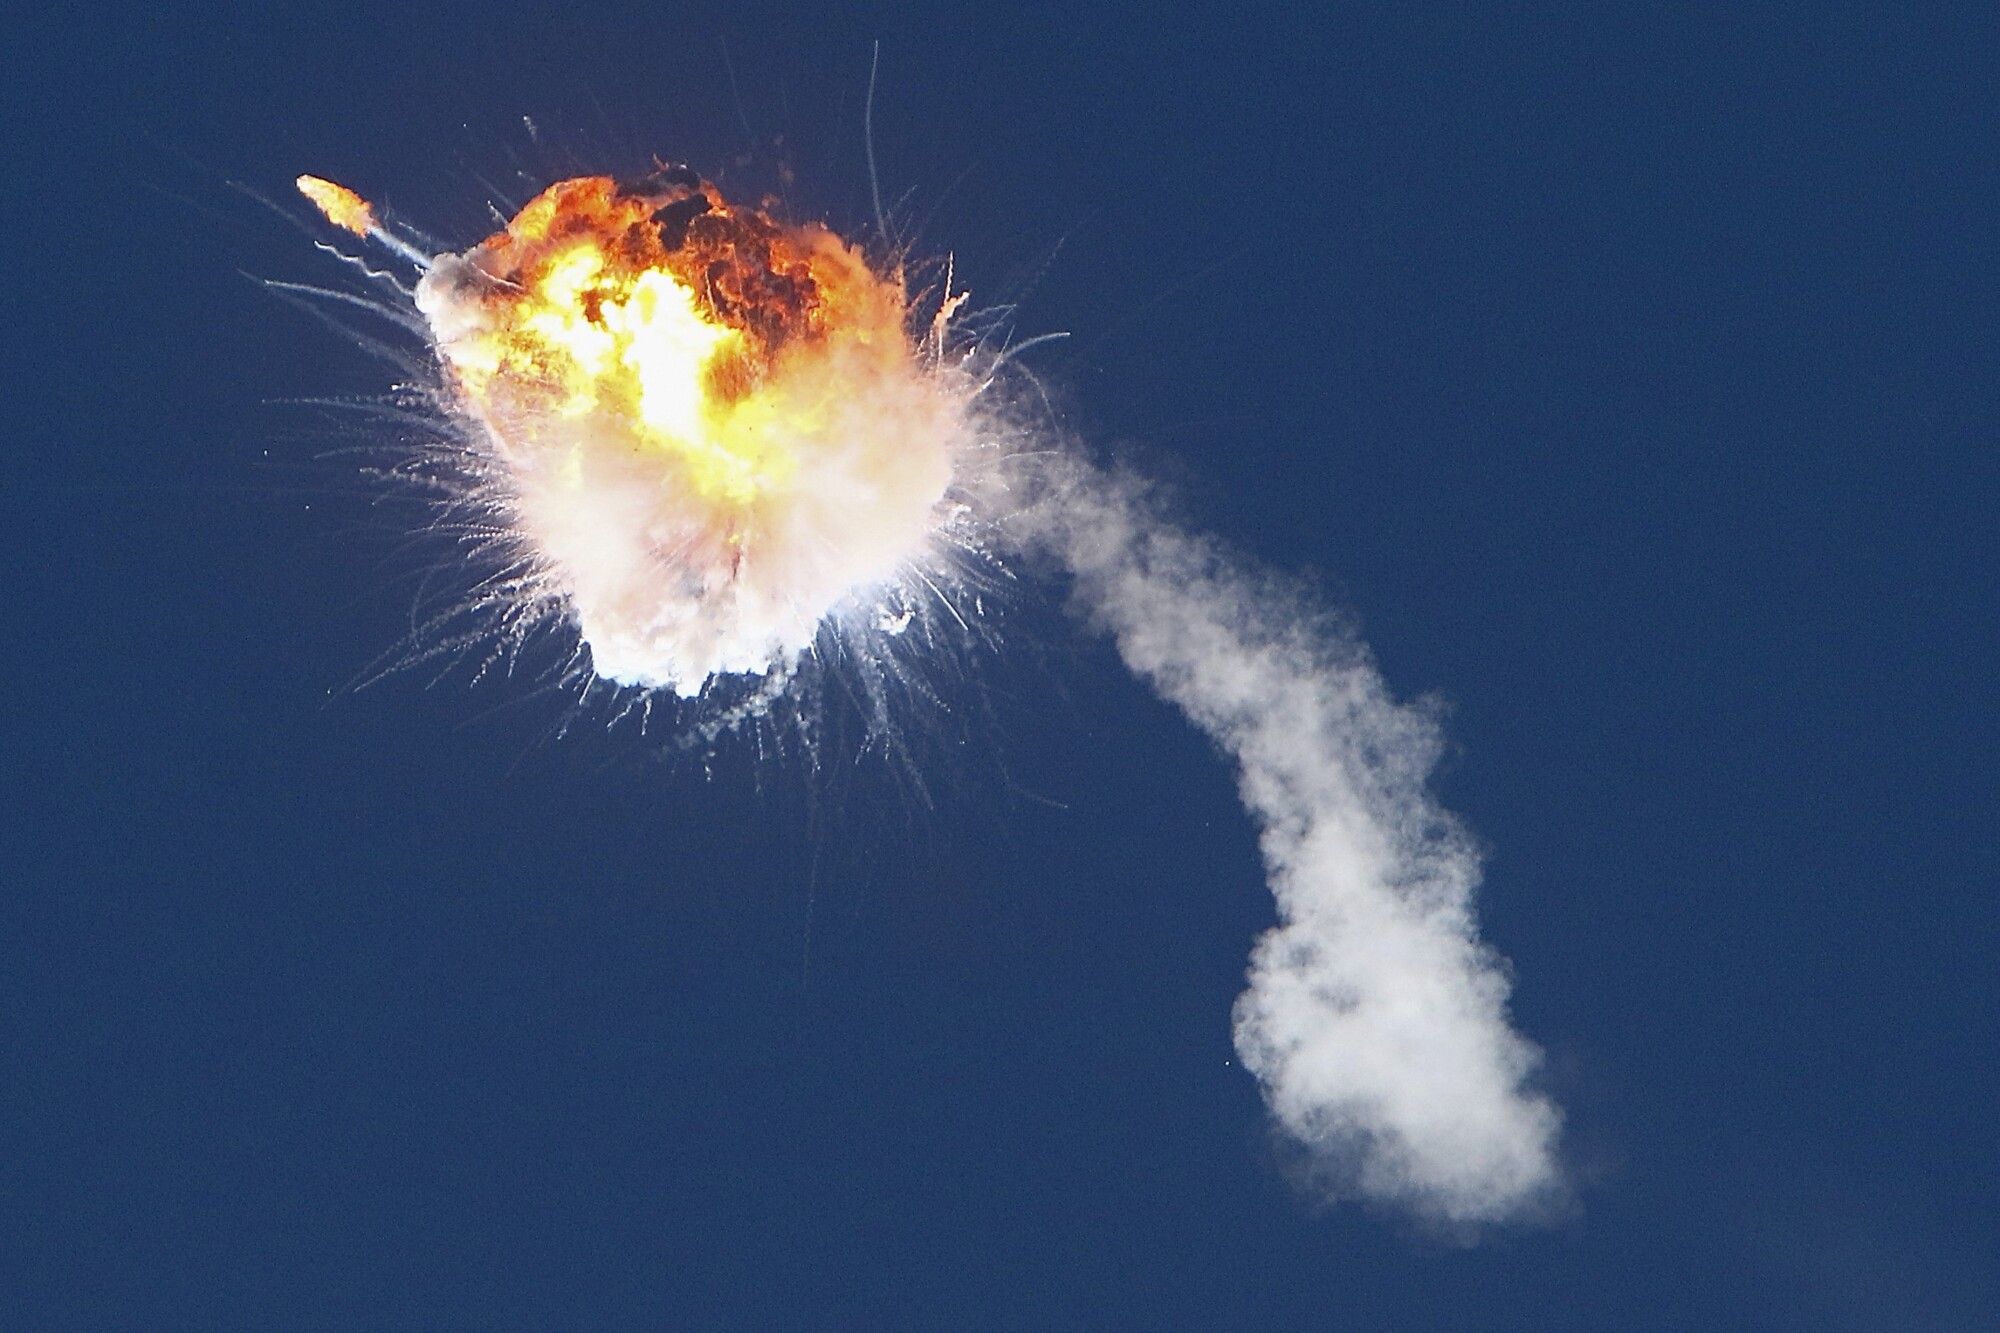 Rocket ‘terminated In Fiery Explosion Over Pacific Ocean